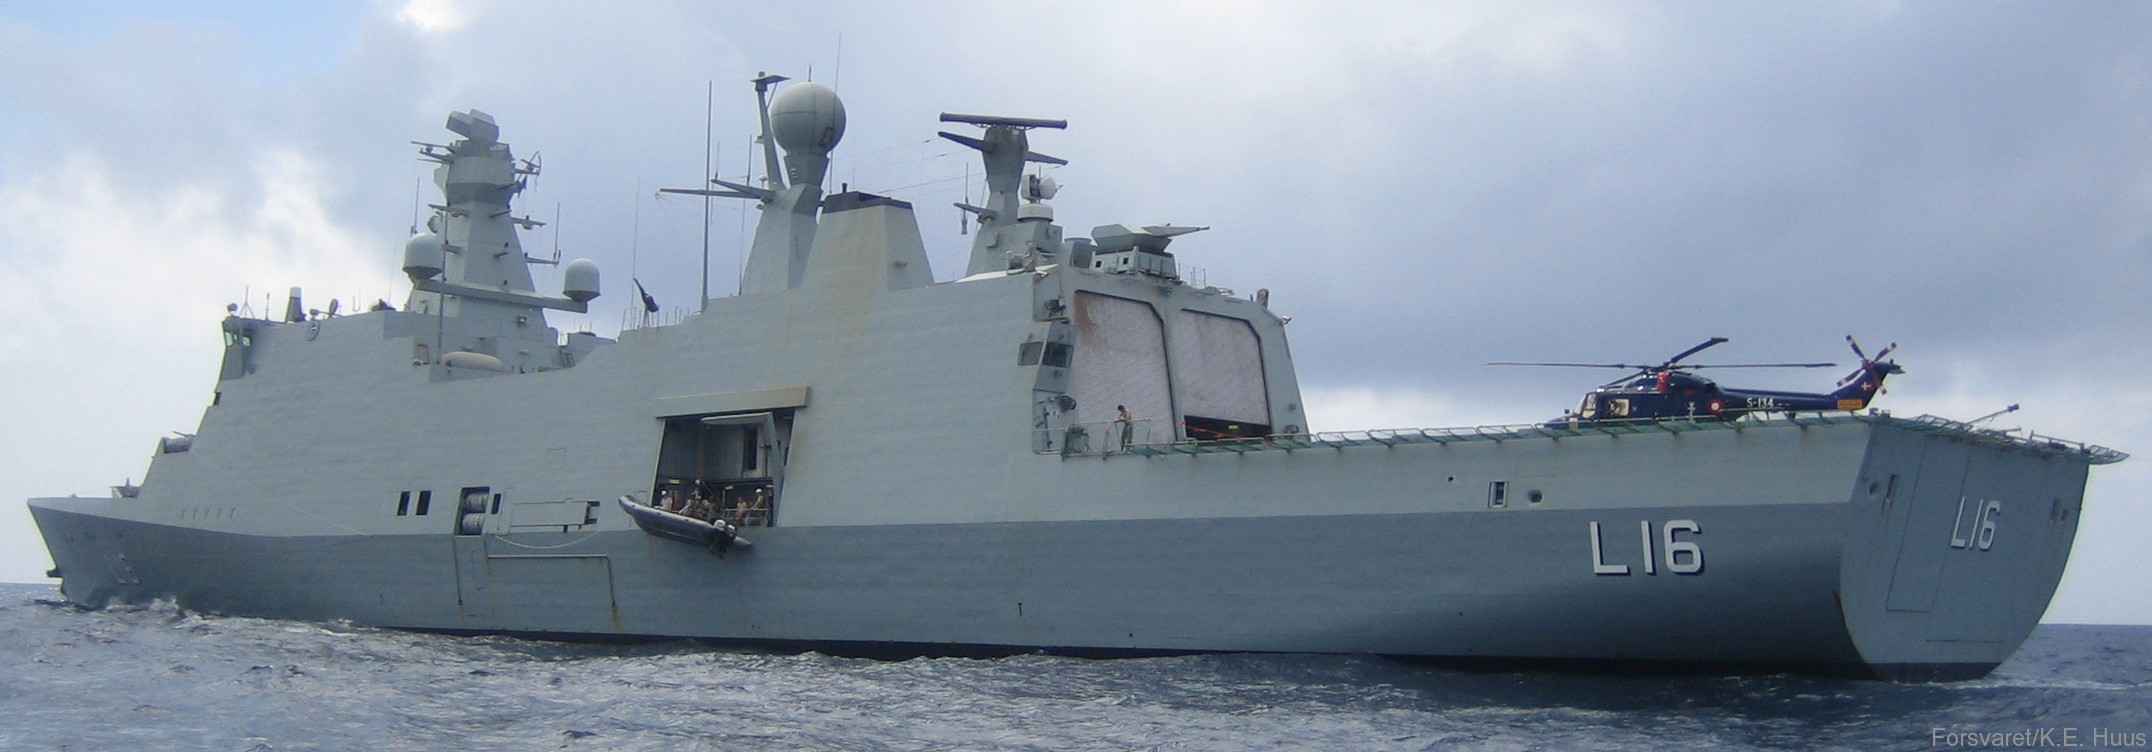 l-16 hdms absalon command support ship frigate royal danish navy 82